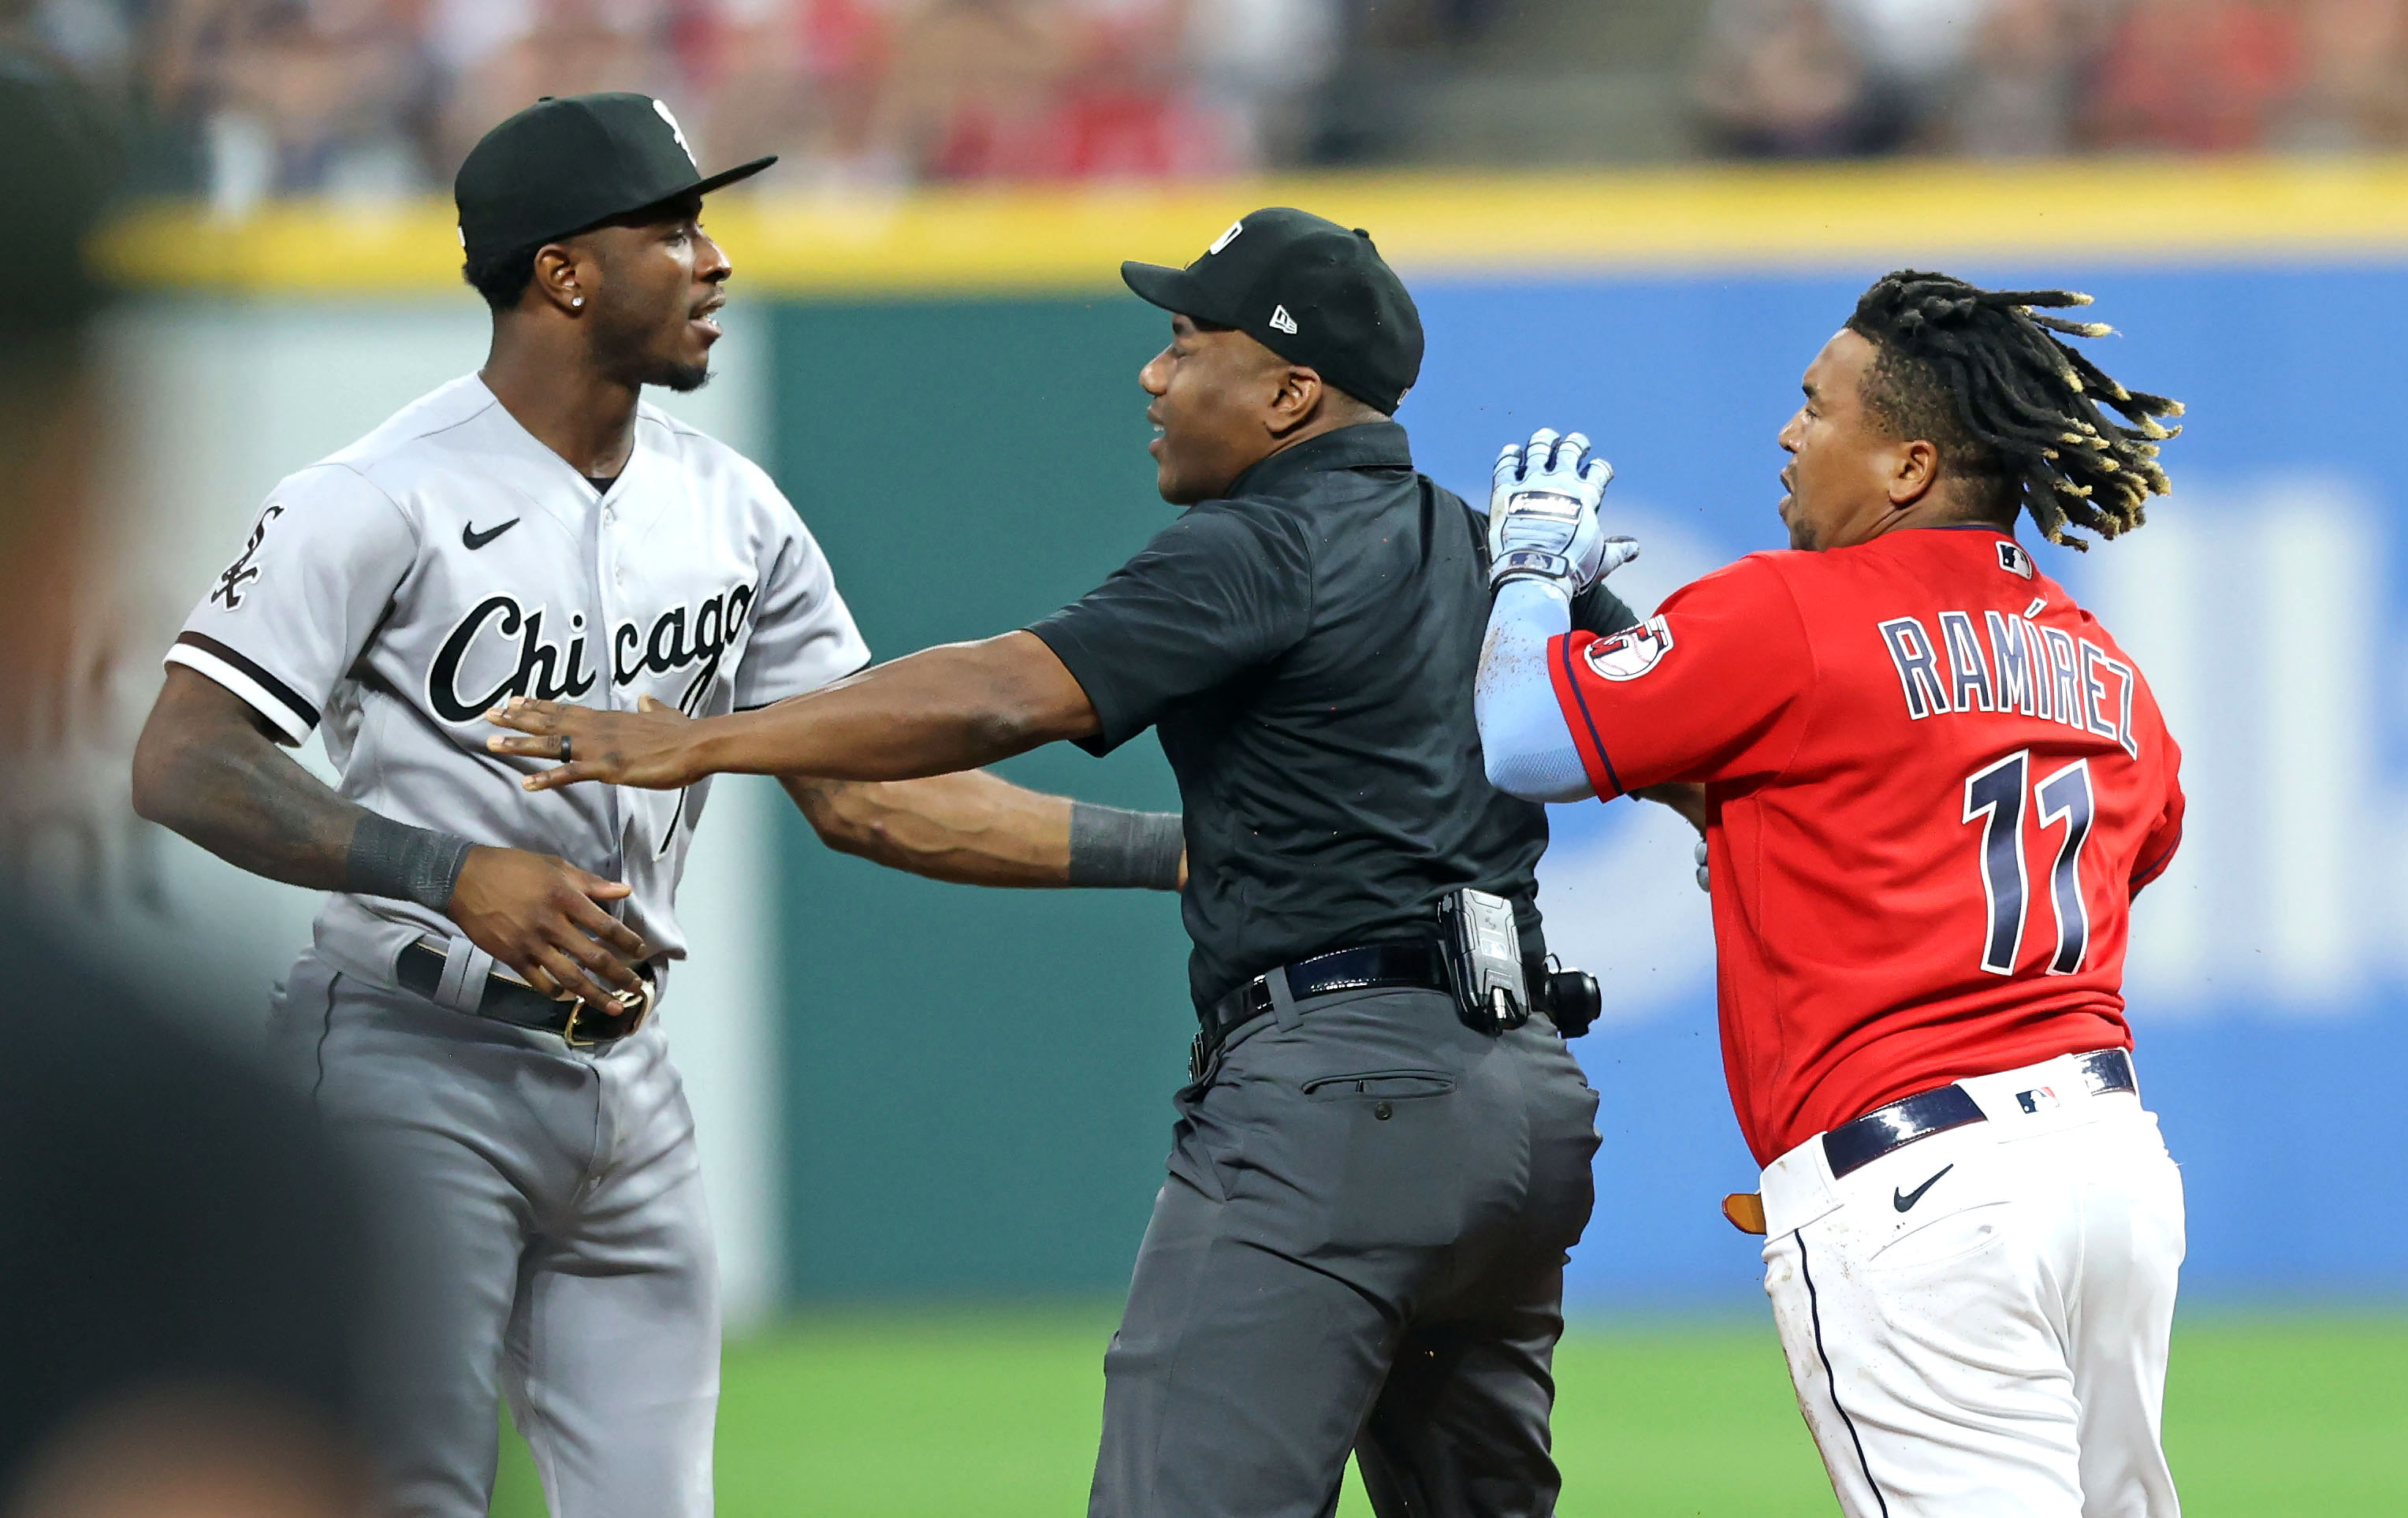 Anderson, Ramírez facing suspensions after fight, 6 ejections in